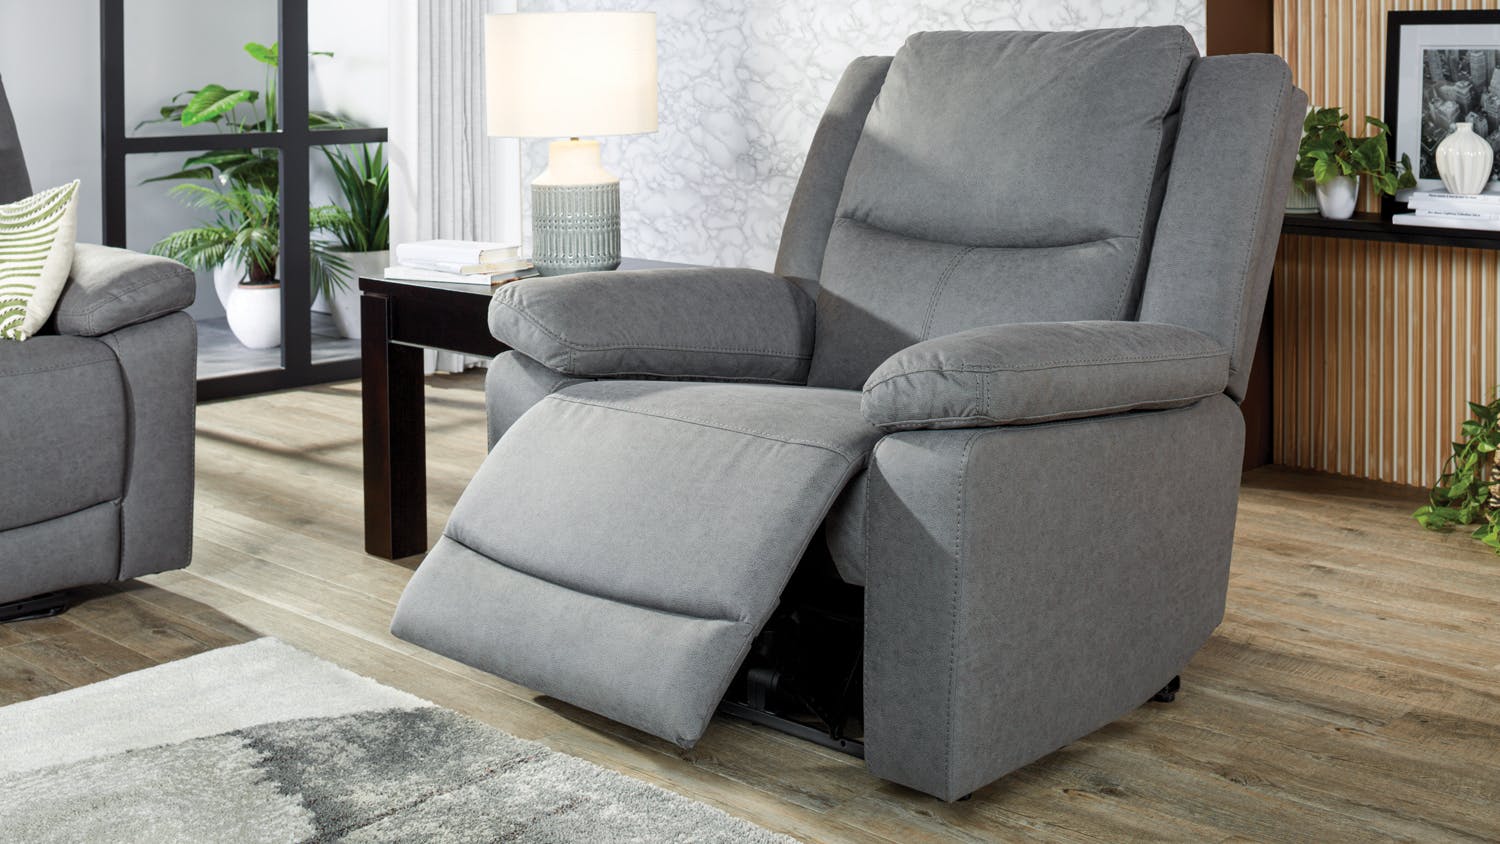 Savoy Fabric Electric Recliner Chair by Kuka Furniture